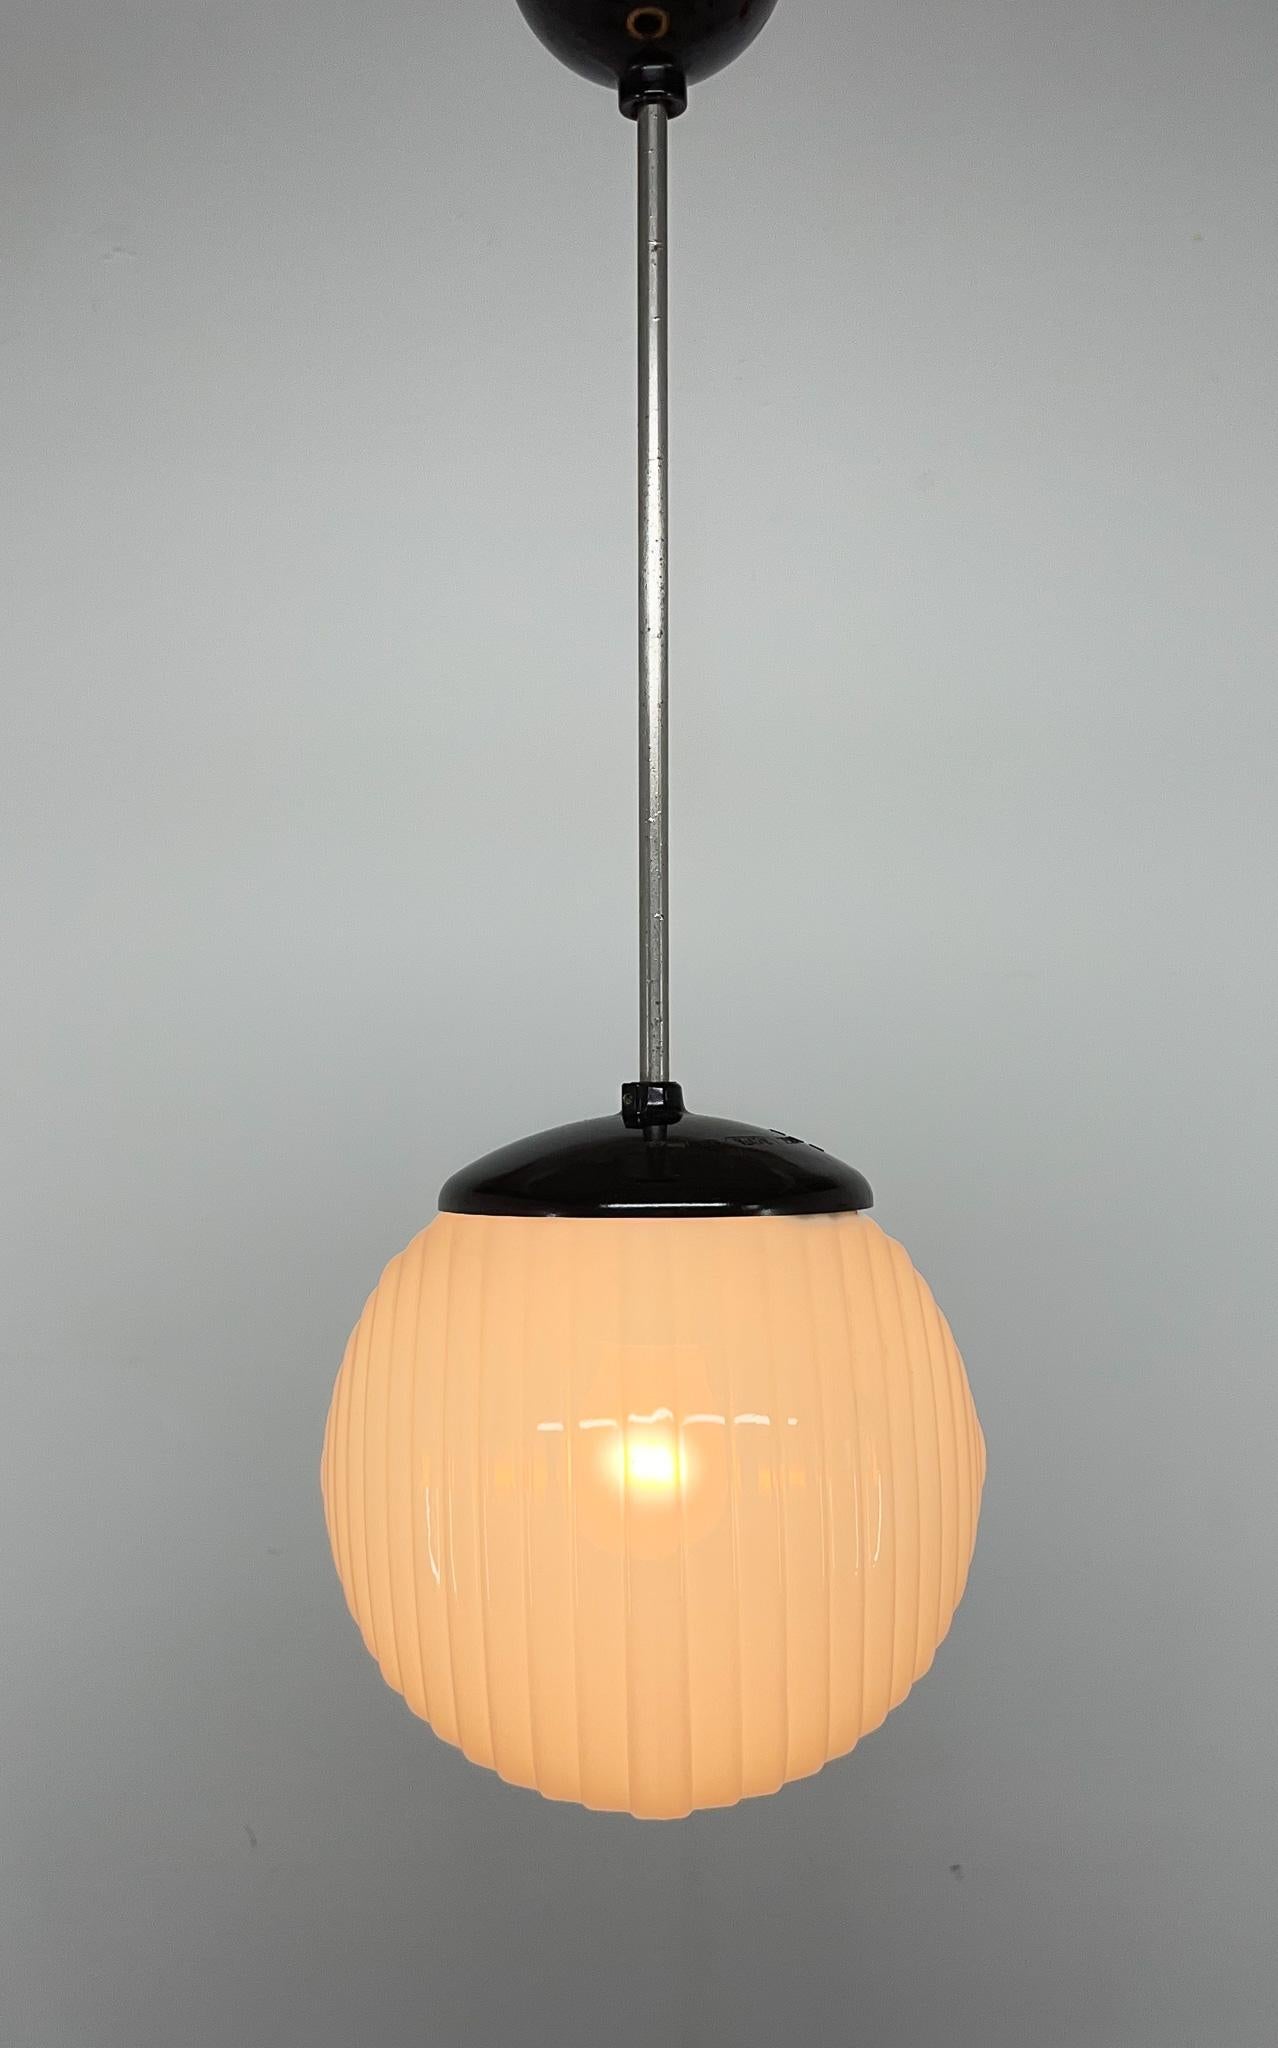 Vintage pendant light from the 1970s. Combination of bakelite and milk glass. Very good vintage condition.